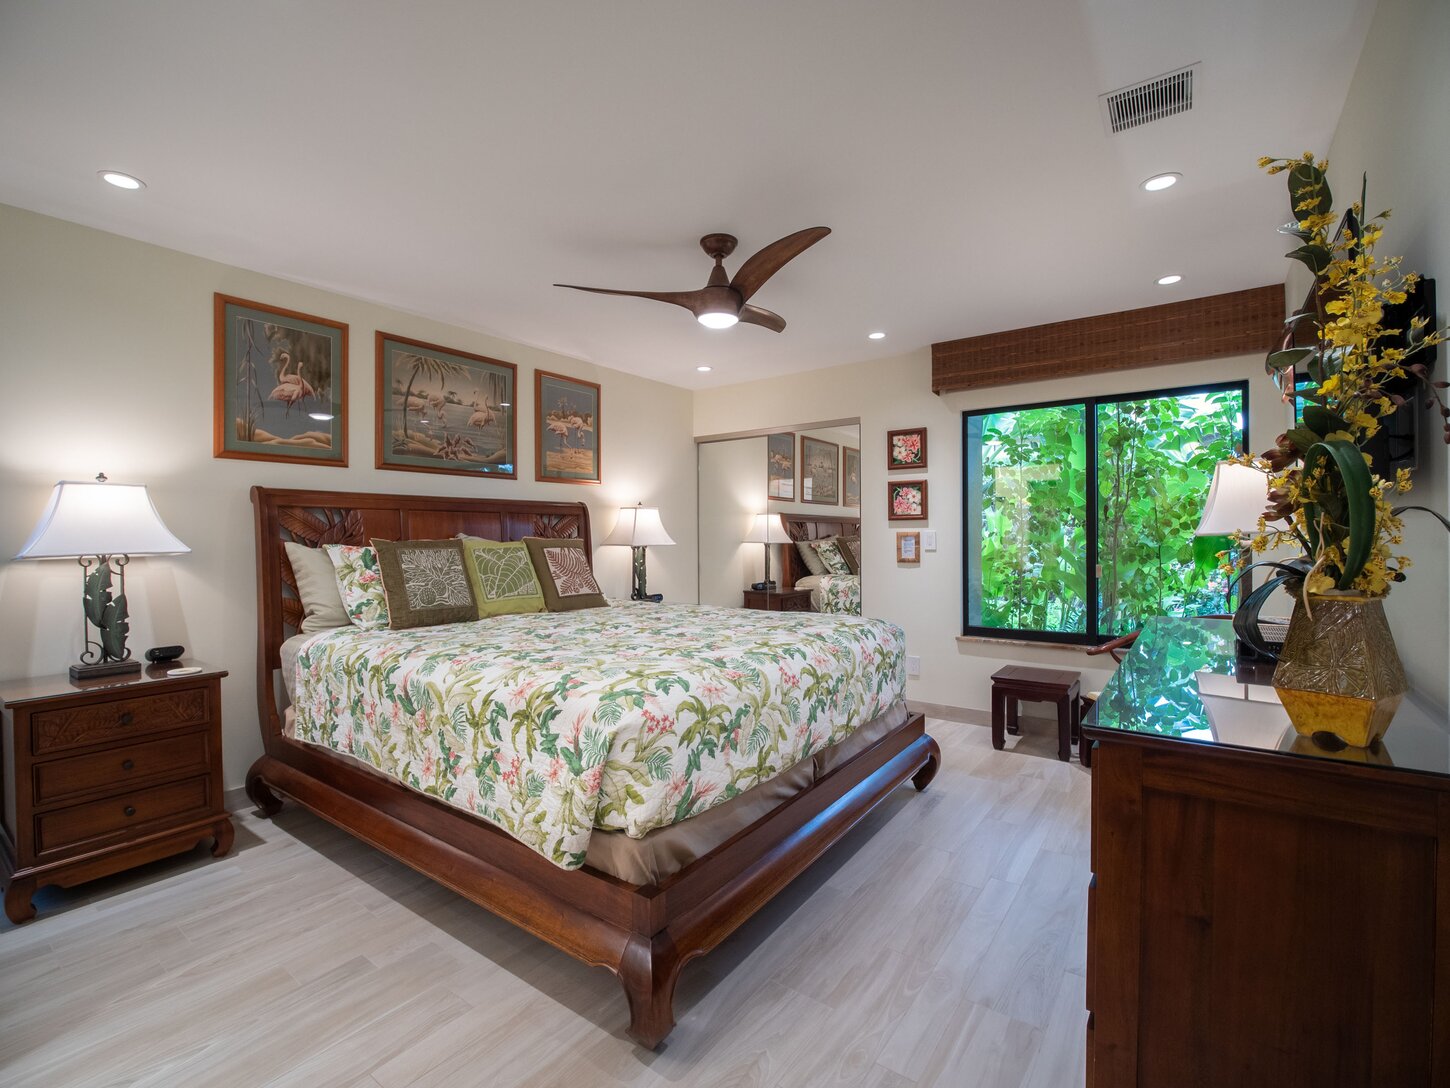 Luxury master bedroom suite features hand carved, solid mahogany furnishings